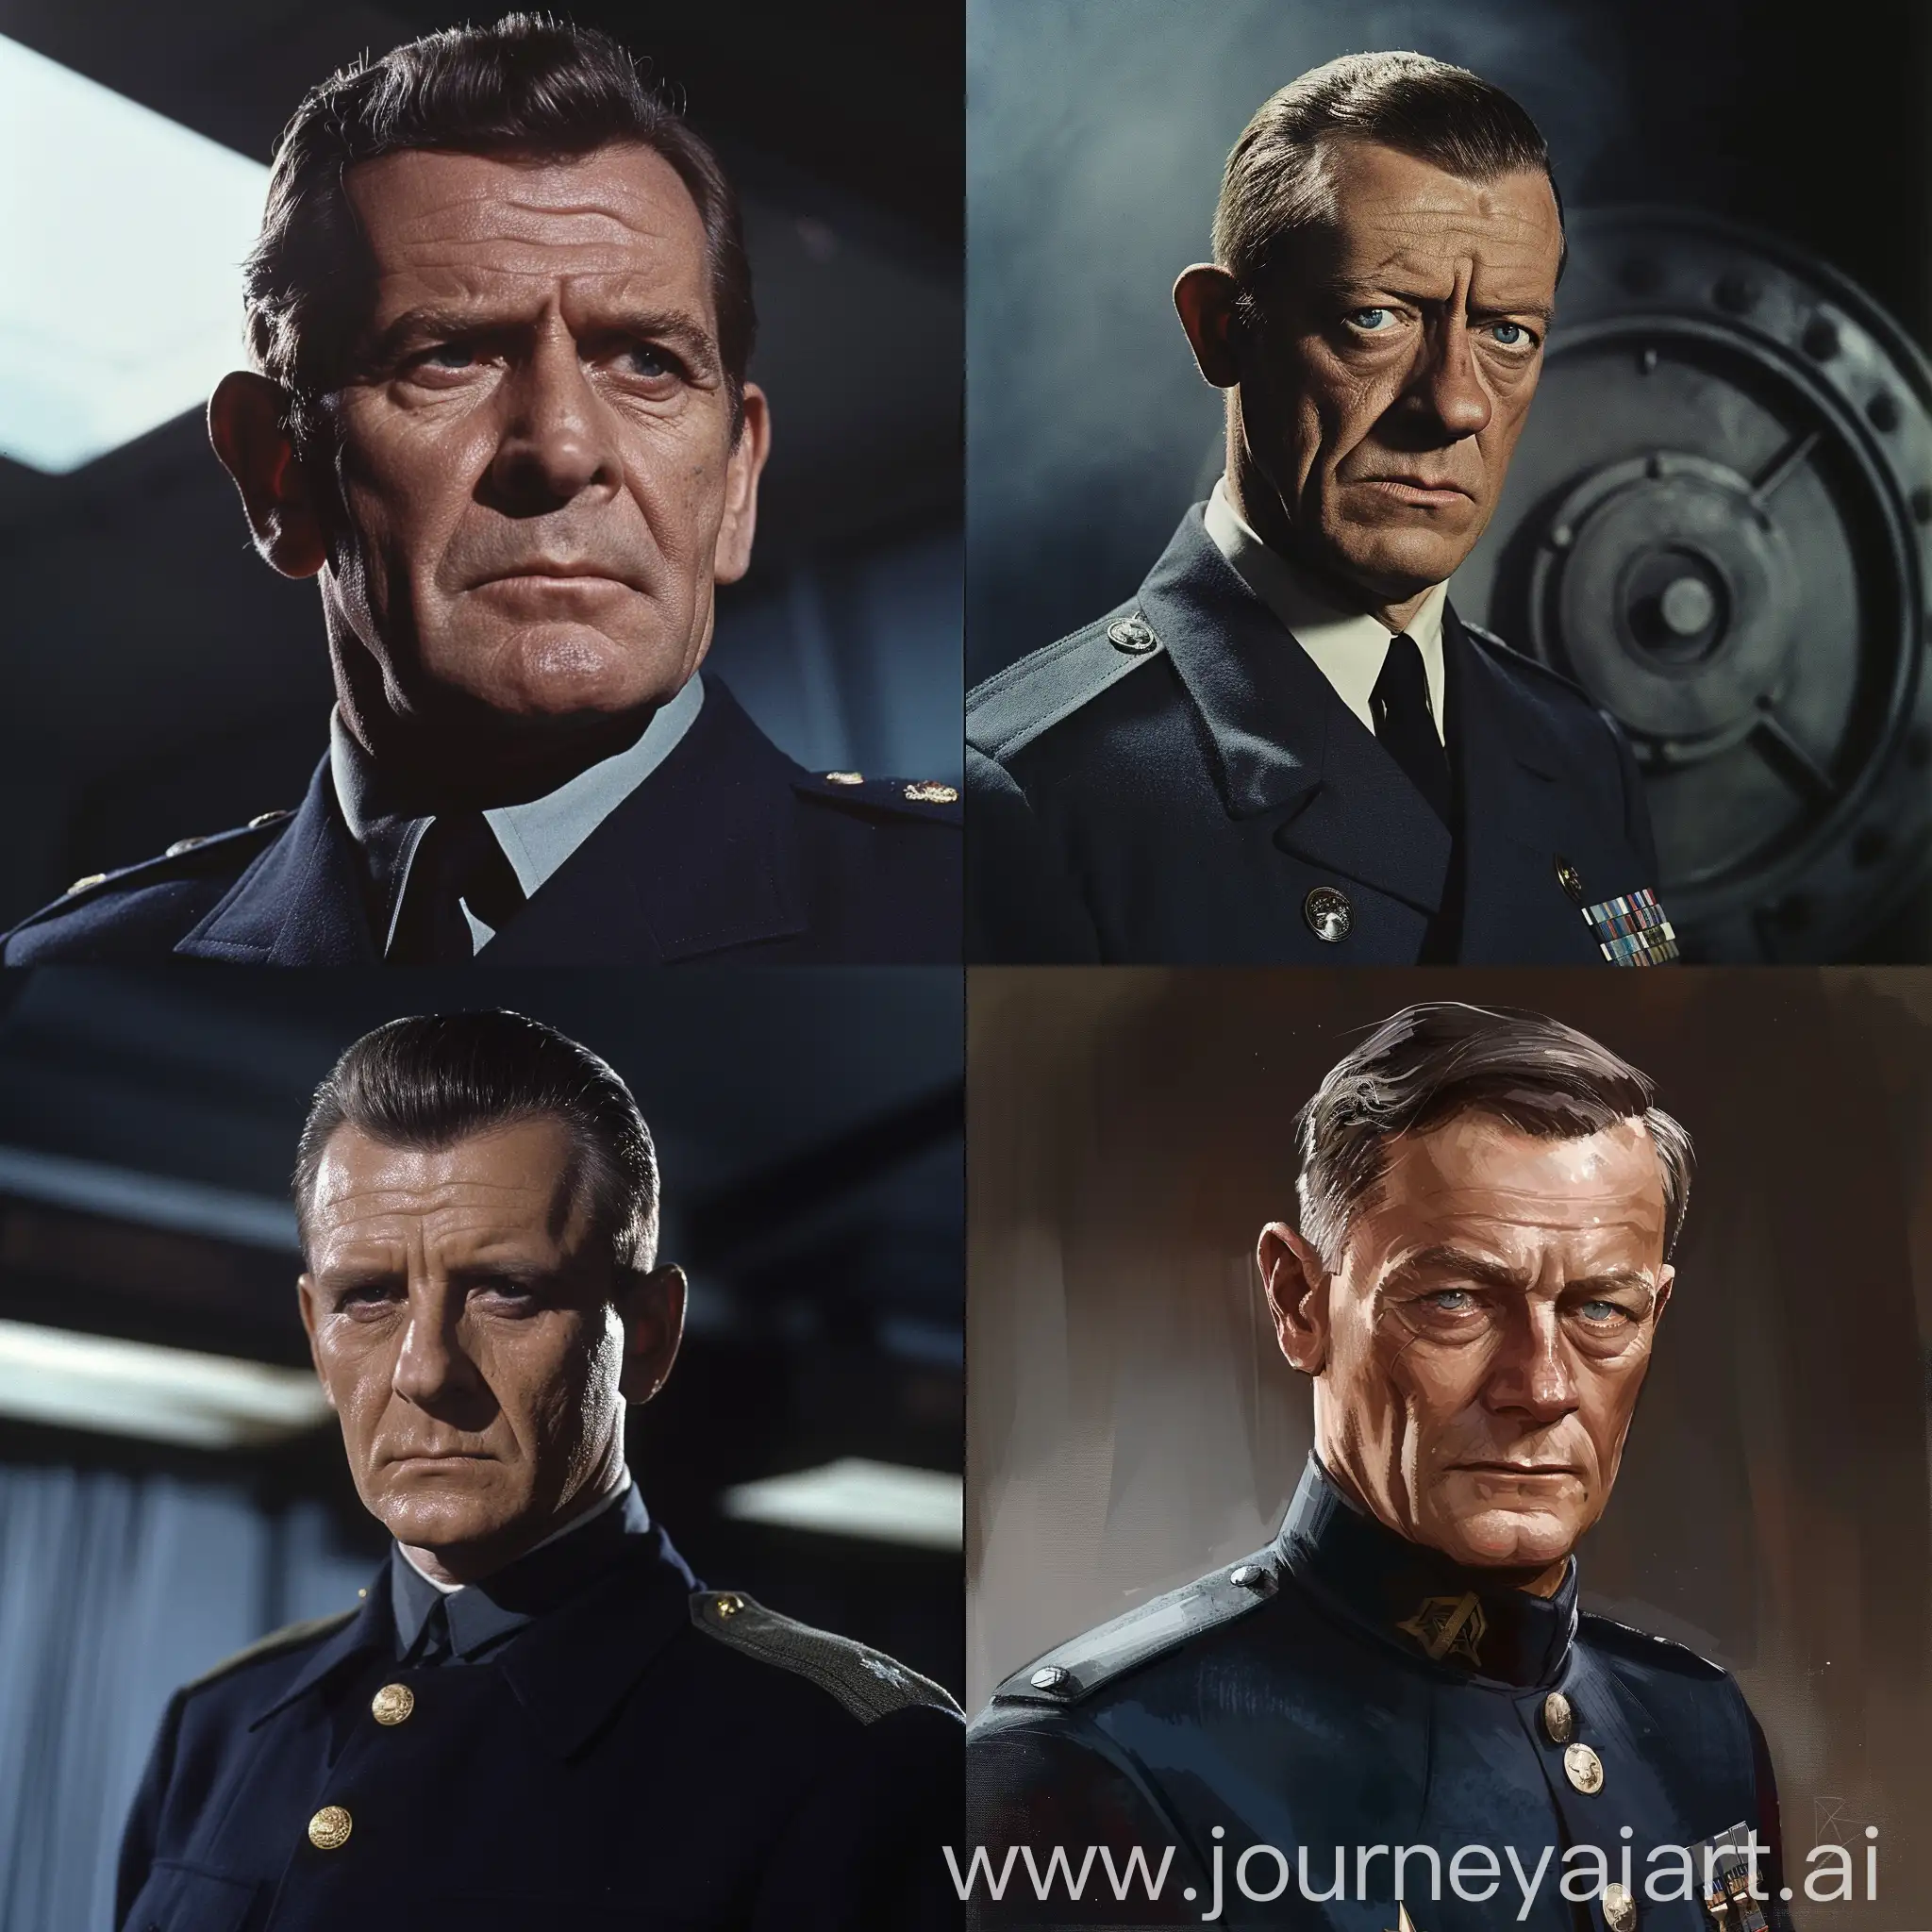 a pragmatic and no-nonsense figure with a keen eye for gadgets and weaponry. Unlike his portrayal in the films, where he's often depicted as older and more distinguished, in the novels, Major Boothroyd is described as a younger man, perhaps in his forties, with a military bearing.

Physically, Major Boothroyd is often portrayed as being of average height, with a fit and trim build befitting his military background. He typically wears the uniform of his service, reflecting his commitment to duty and professionalism. His hair is described as neat and cropped short, suggesting a practical approach to grooming.

While not as eccentric in appearance as his cinematic counterpart, Major Boothroyd exudes an air of authority and expertise in his field. His sharp eyes and no-nonsense demeanor convey his confidence and competence as he assists James Bond with the latest gadgets and equipment essential for his missions.

Overall, Major Boothroyd's physical appearance in the James Bond novels reflects his role as a capable and reliable ally to James Bond, providing the necessary tools for Bond's dangerous missions with efficiency and precision.